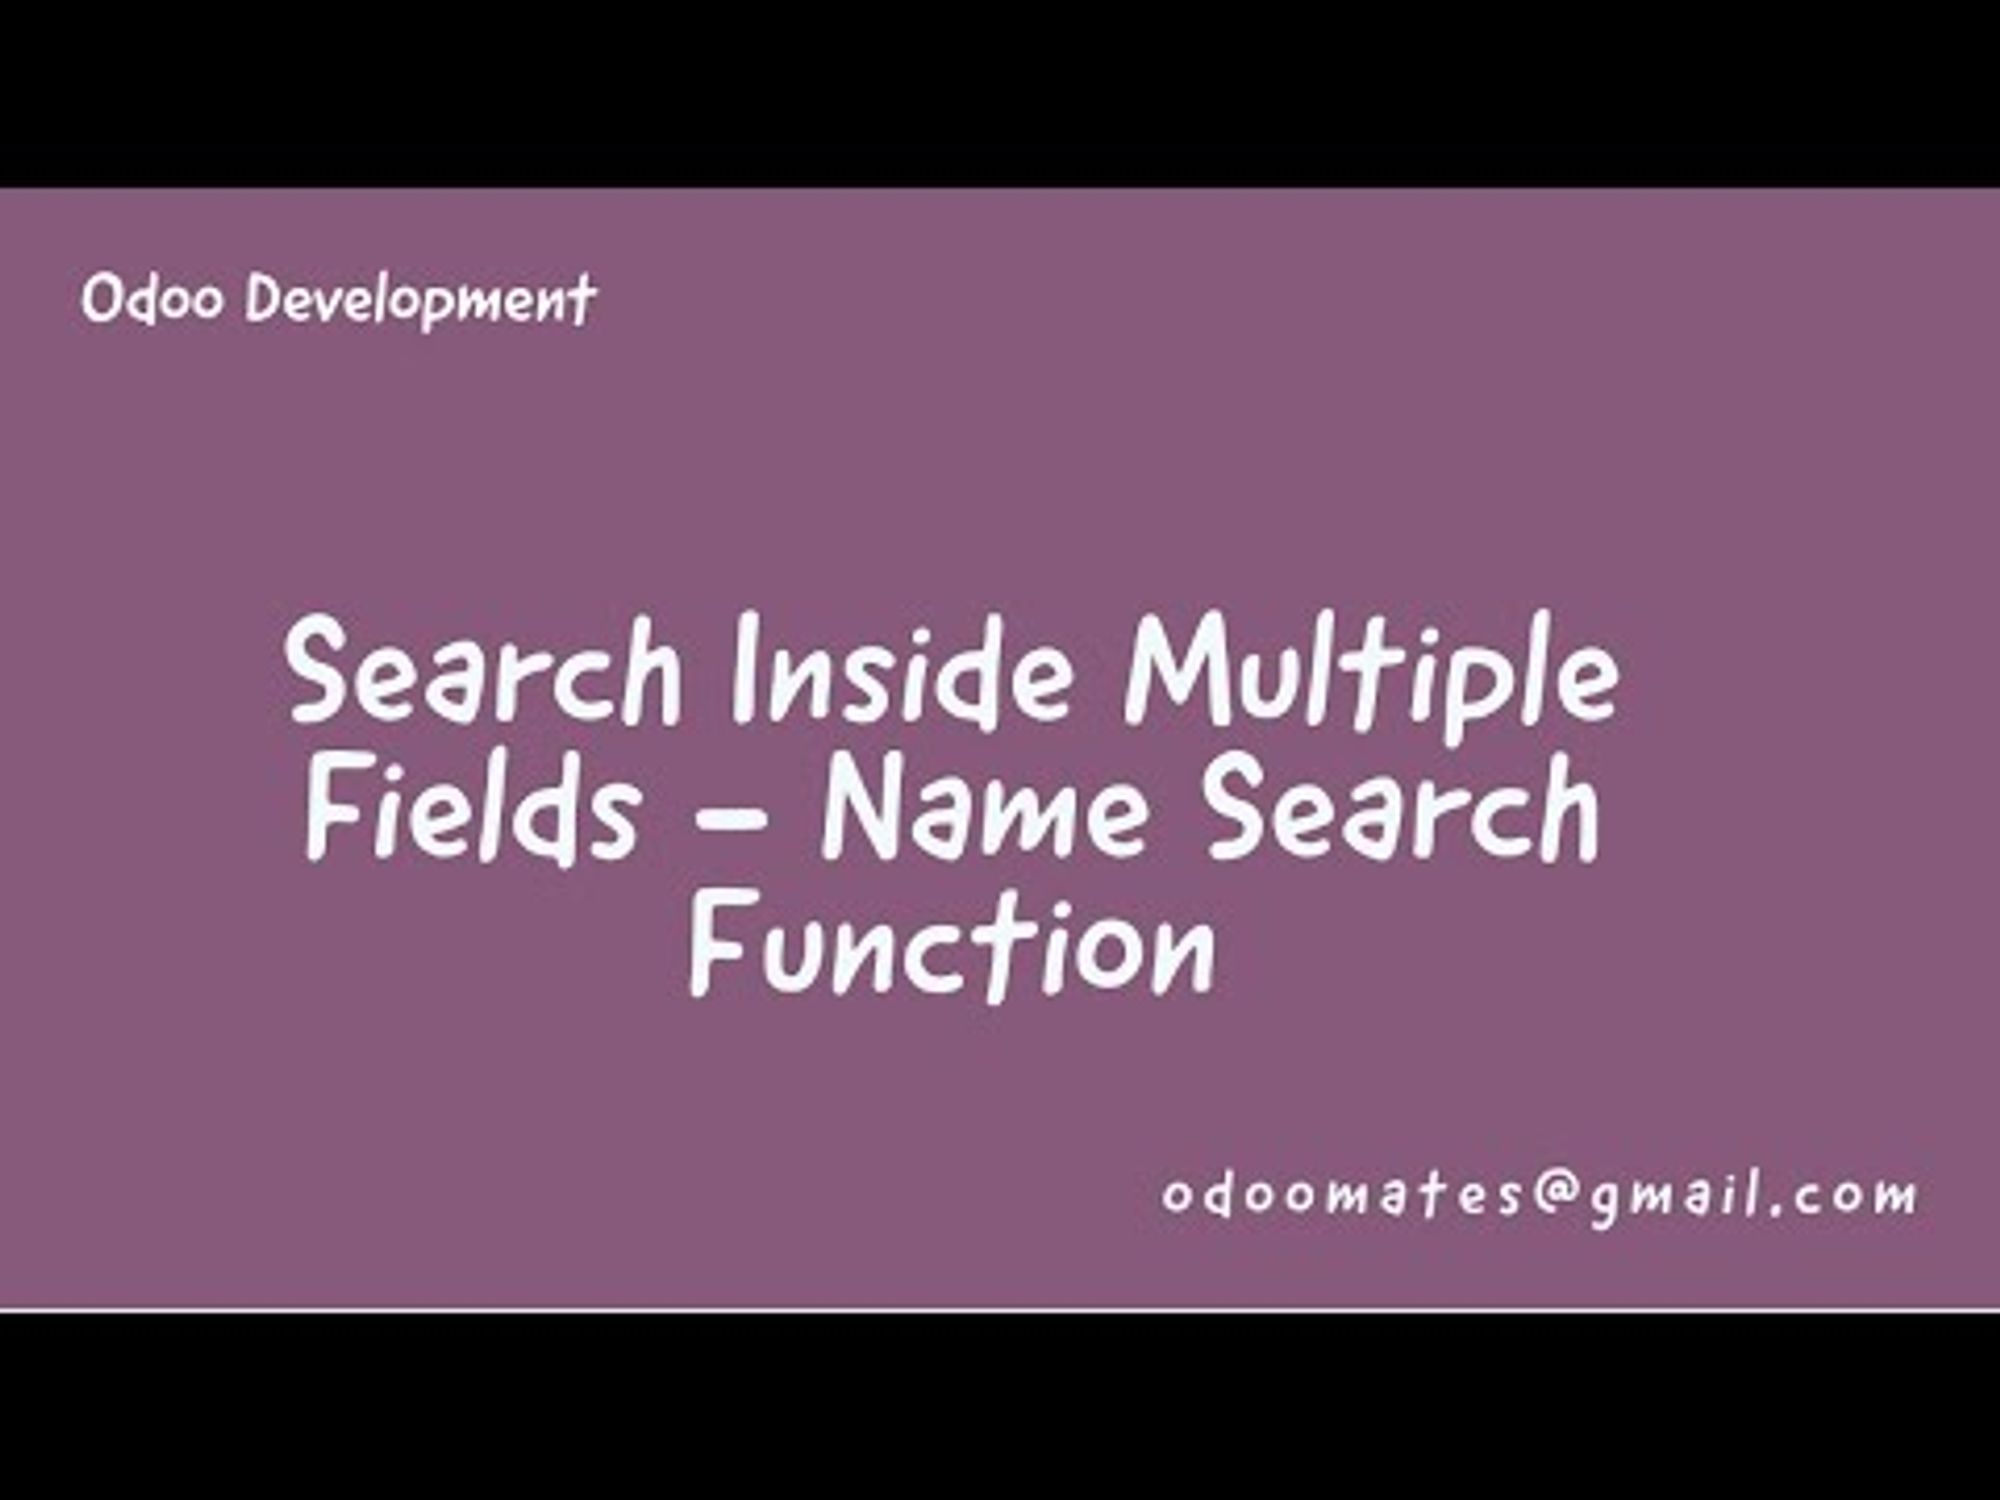 Name Search Function in Odoo: Search Using Multiple field values inside a model